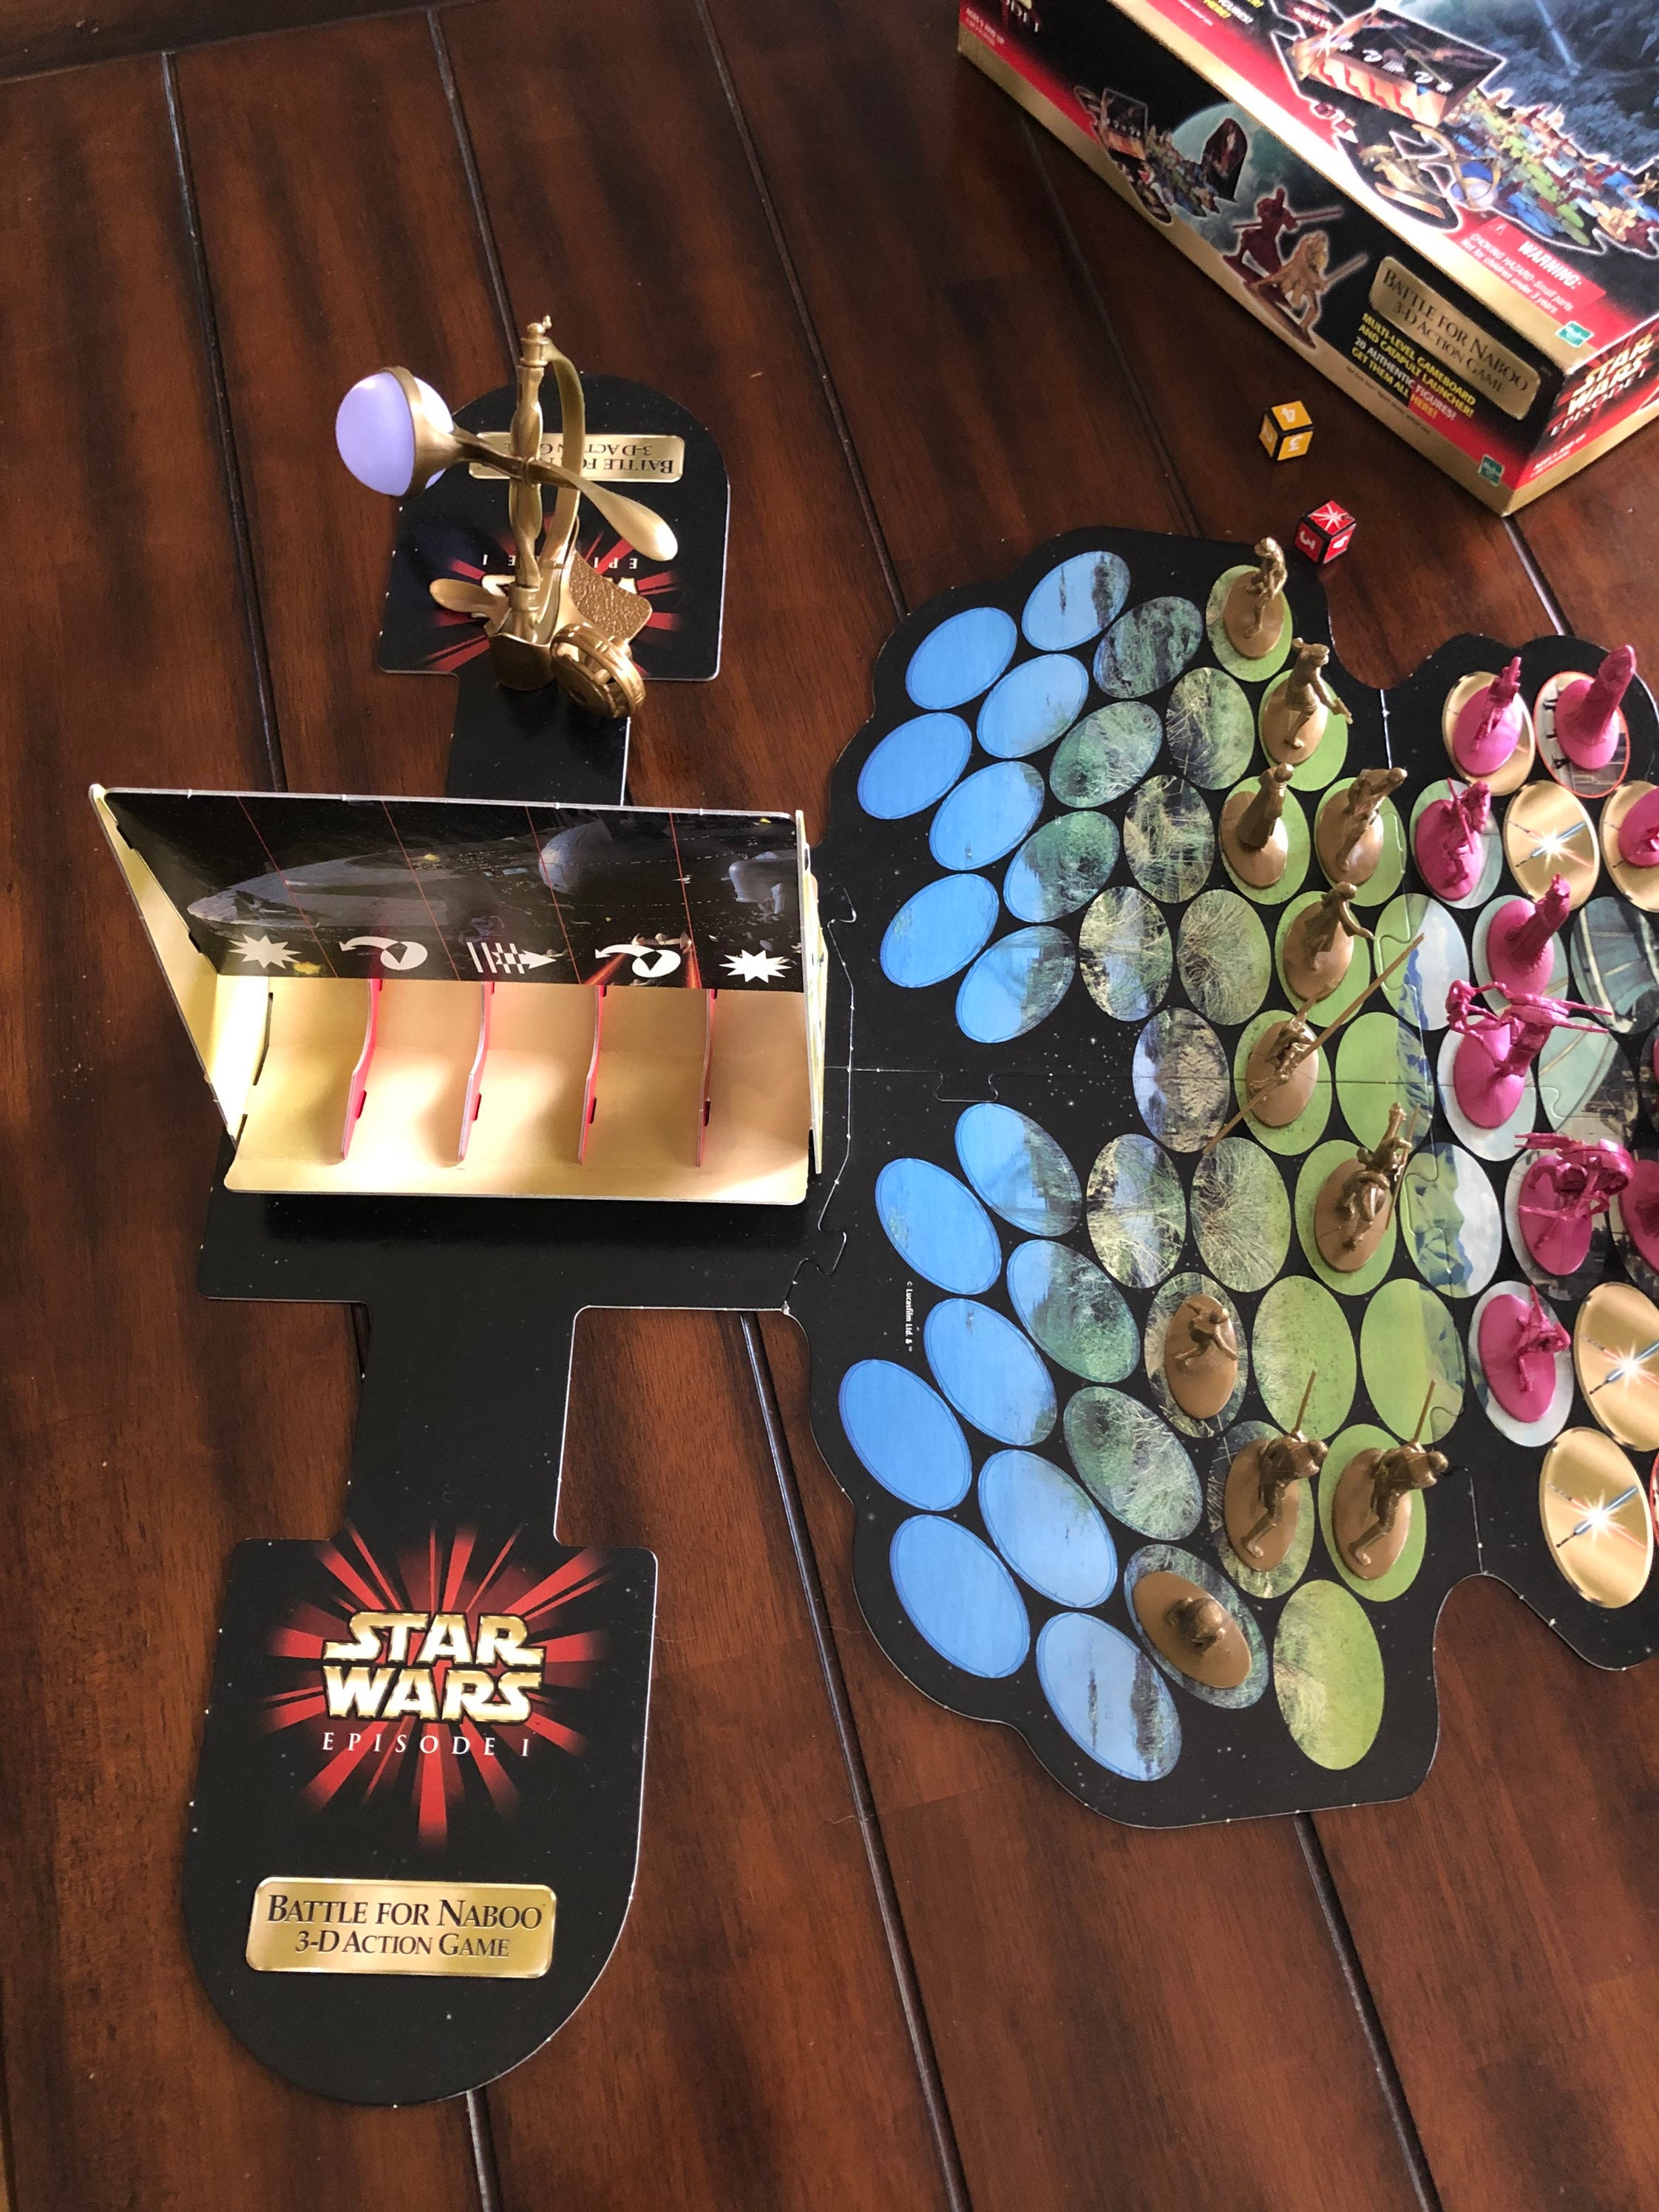 RARE Hasbro Star Wars Episode 1 Battle for Naboo 3d Action Board Game 1999  for sale online